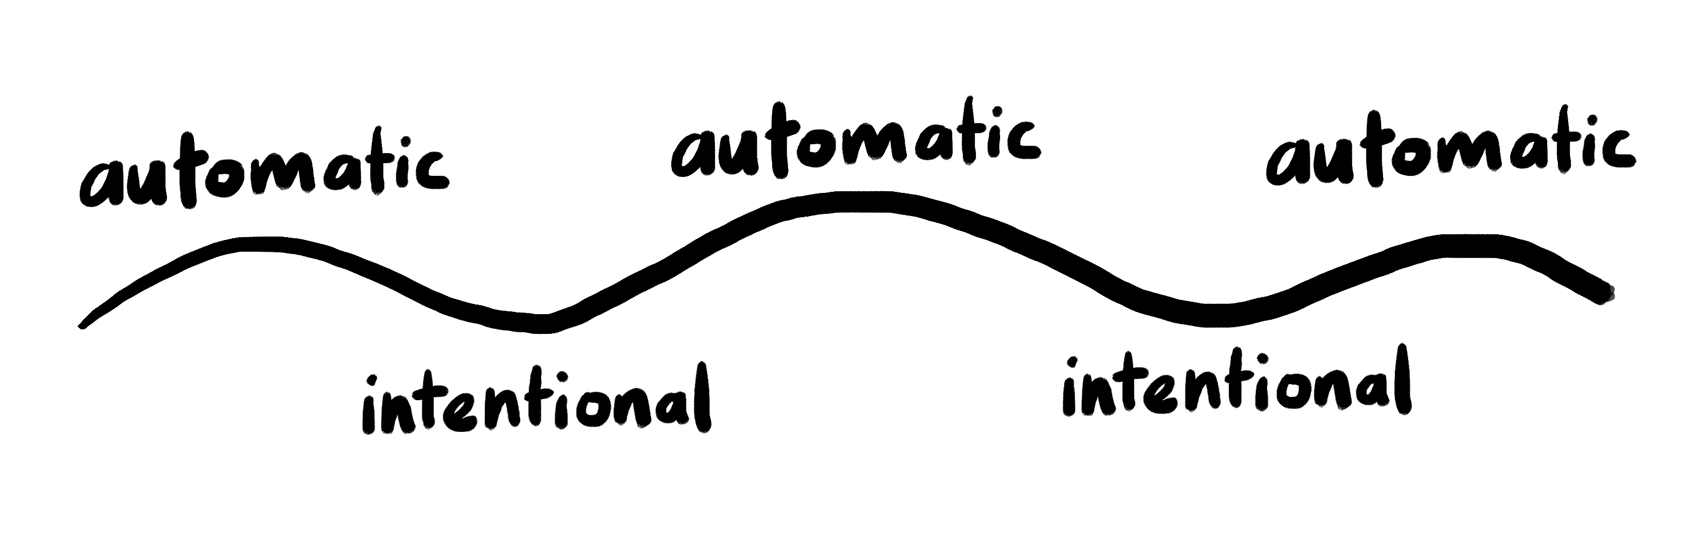 automatic-vs-intentional